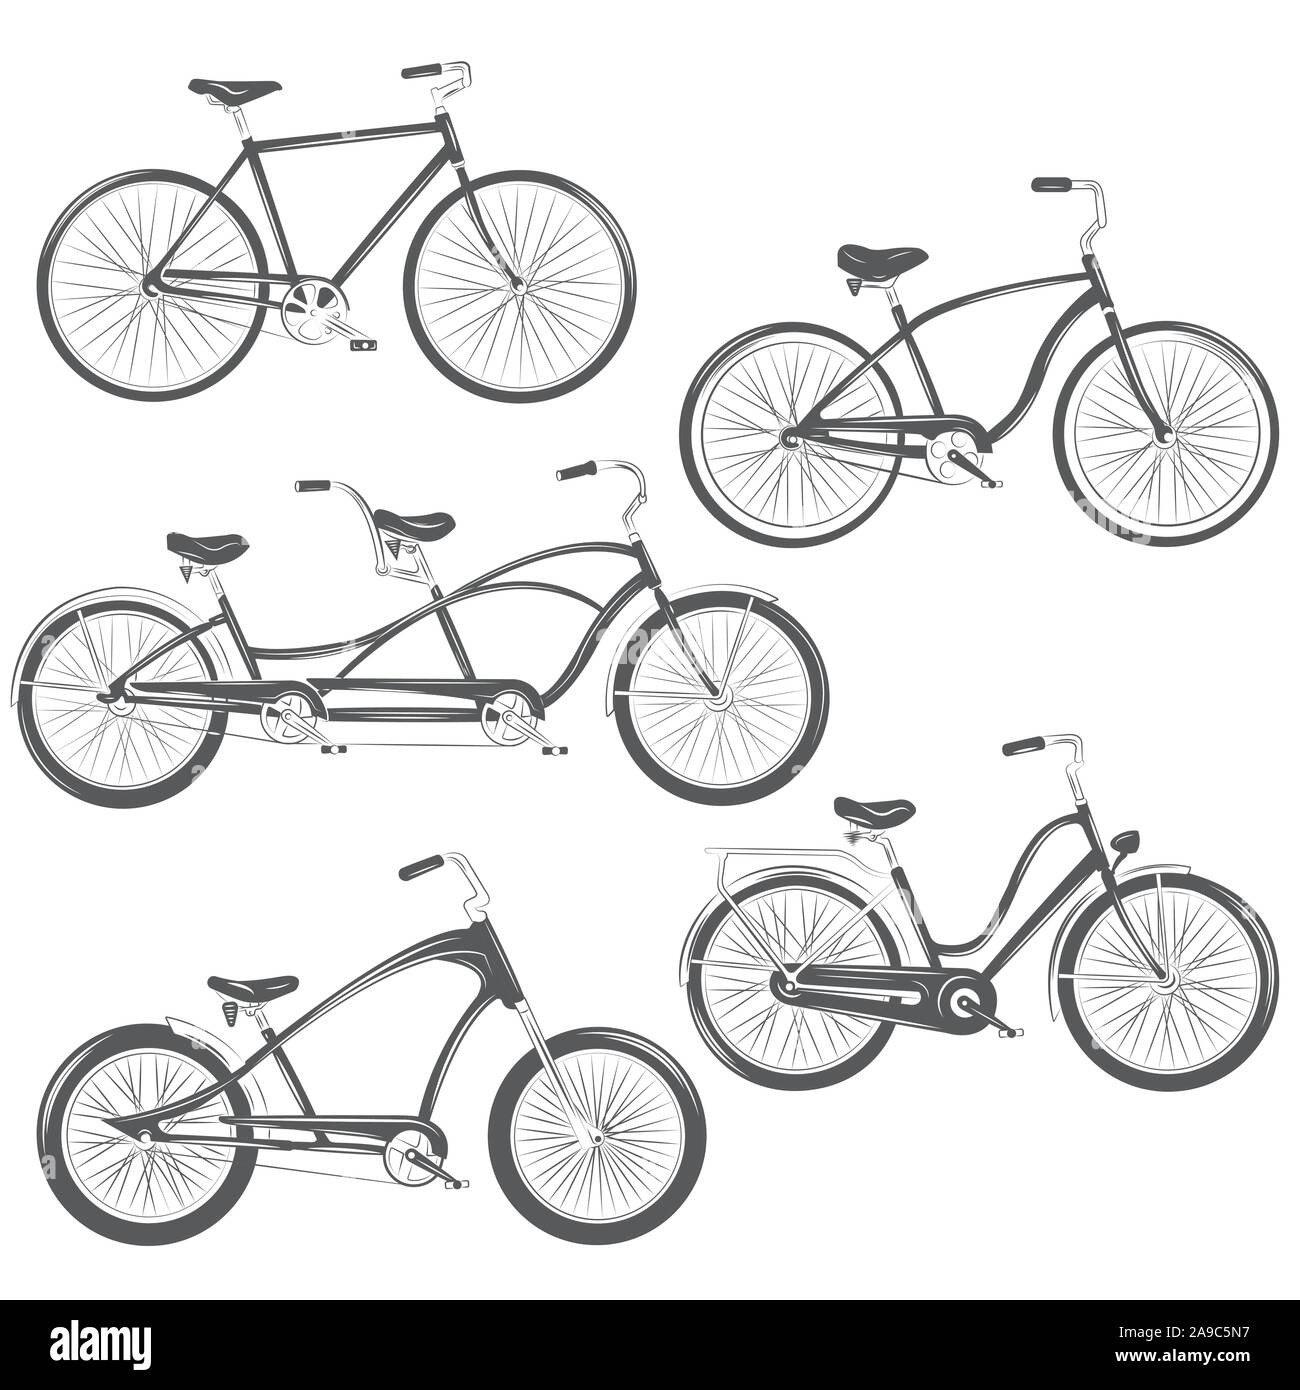 Bicycle Vector illustration. Set with four different bicycles: single, chopper, cruiser, tandem. T-shirt Graphics, Tattoo Designs Stock Vector